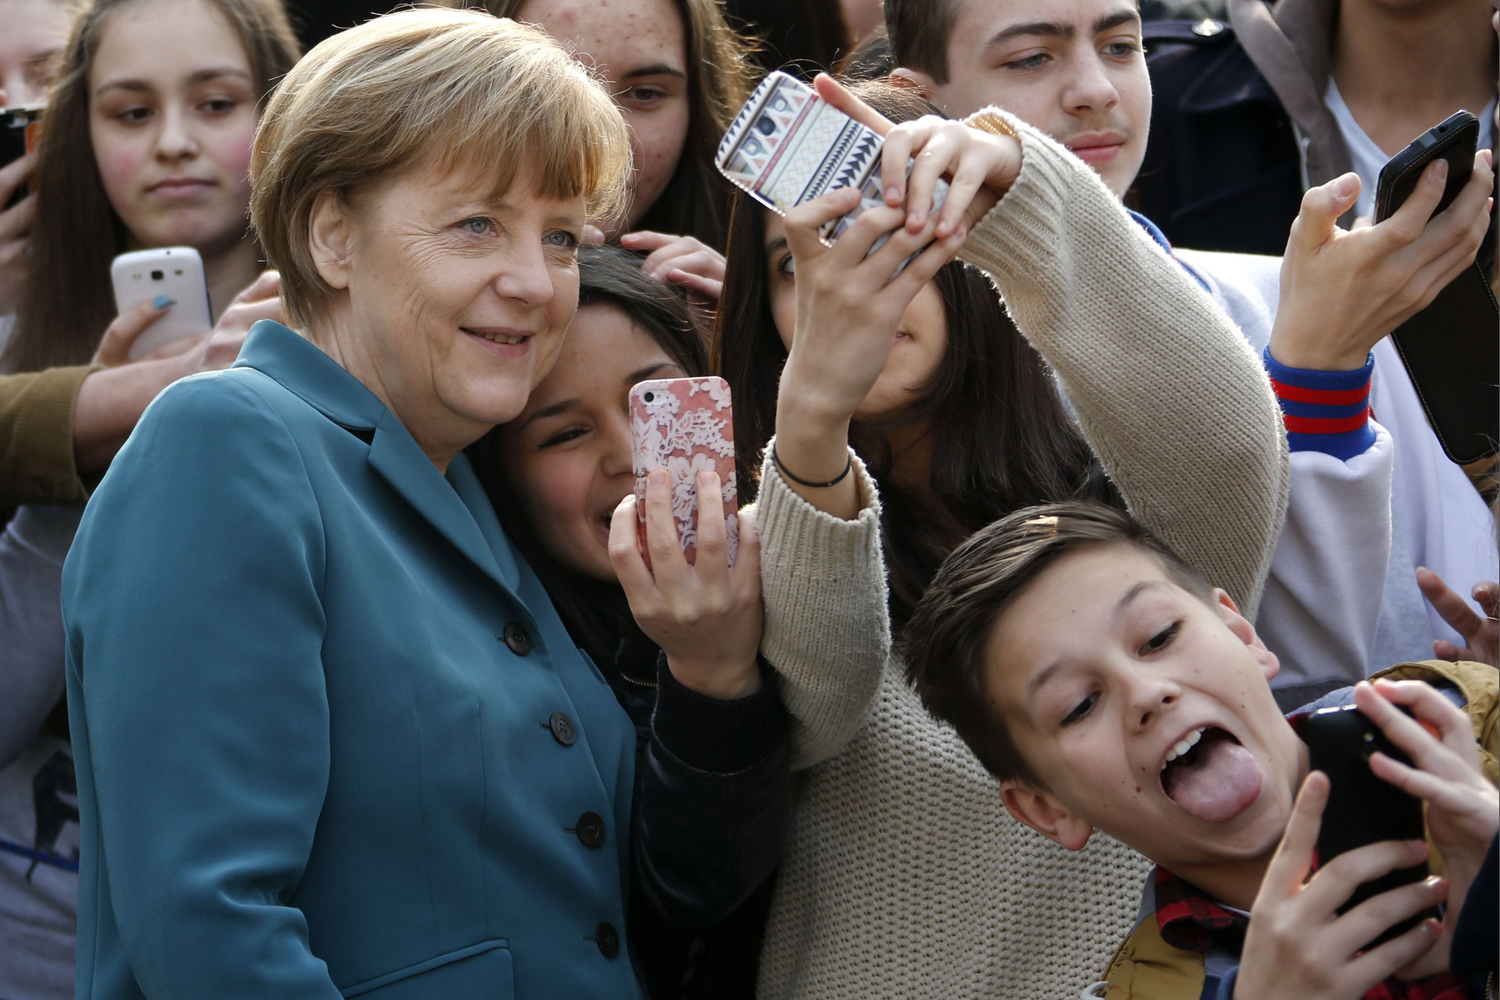 Students take 'selfies' with German Chancellor Angela Merkel as she arrives for a visit at Robert-Jungk Europe high school as part of the Europe-Project Day, in Berlin March 31, 2014 .